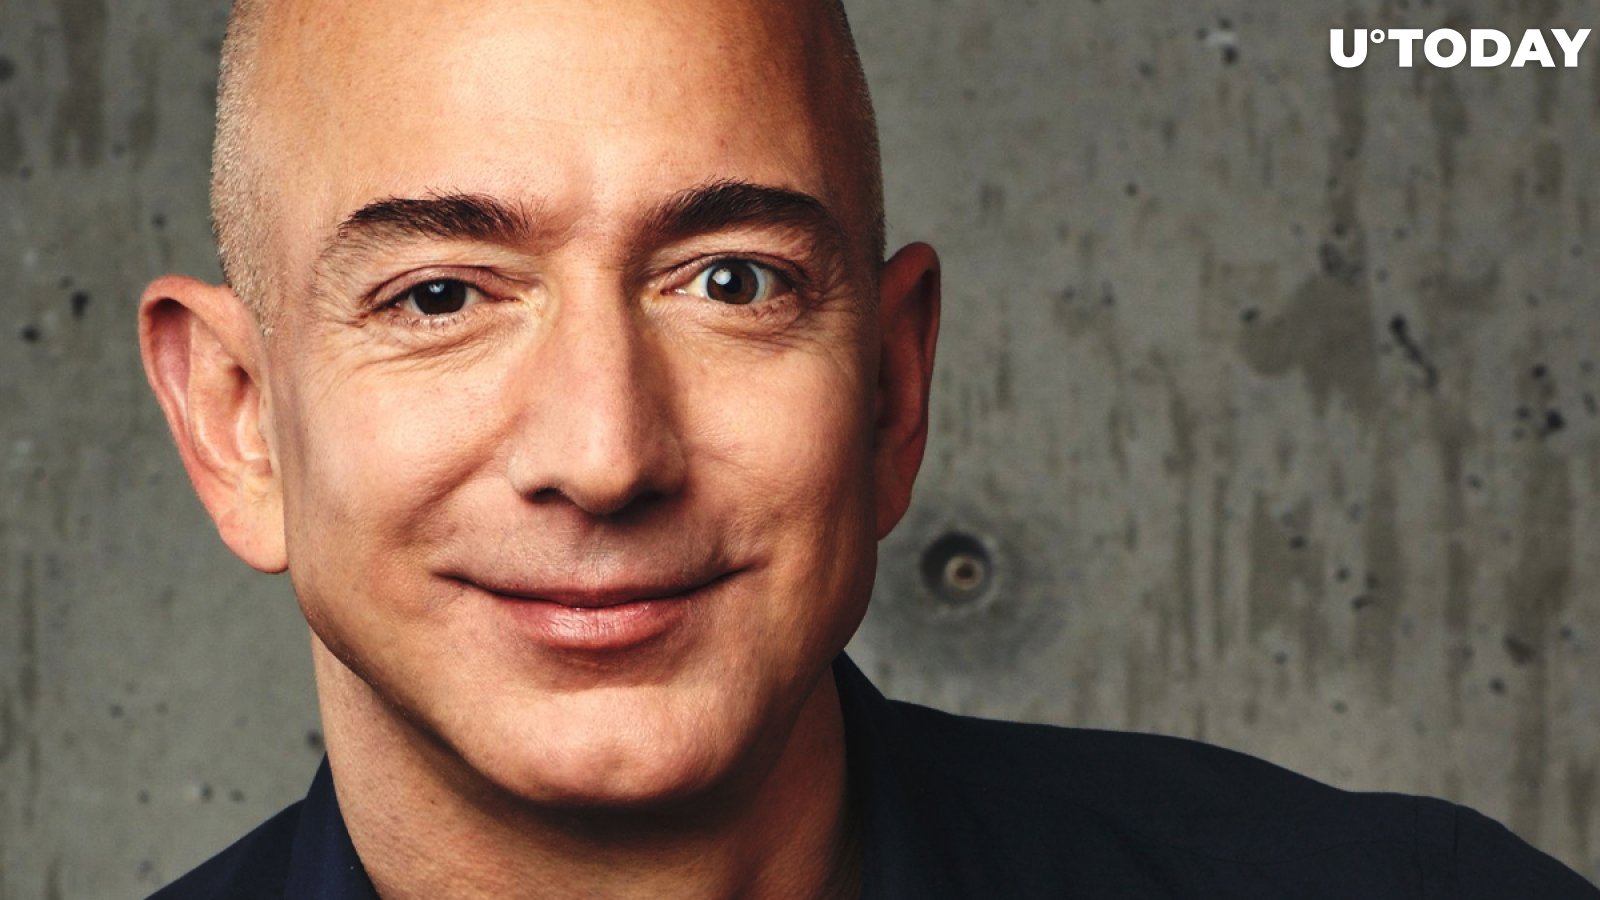 Jeff Bezos Now Follows Dogecoin Co-Founder on Twitter – “It Means A Lot for DOGE”